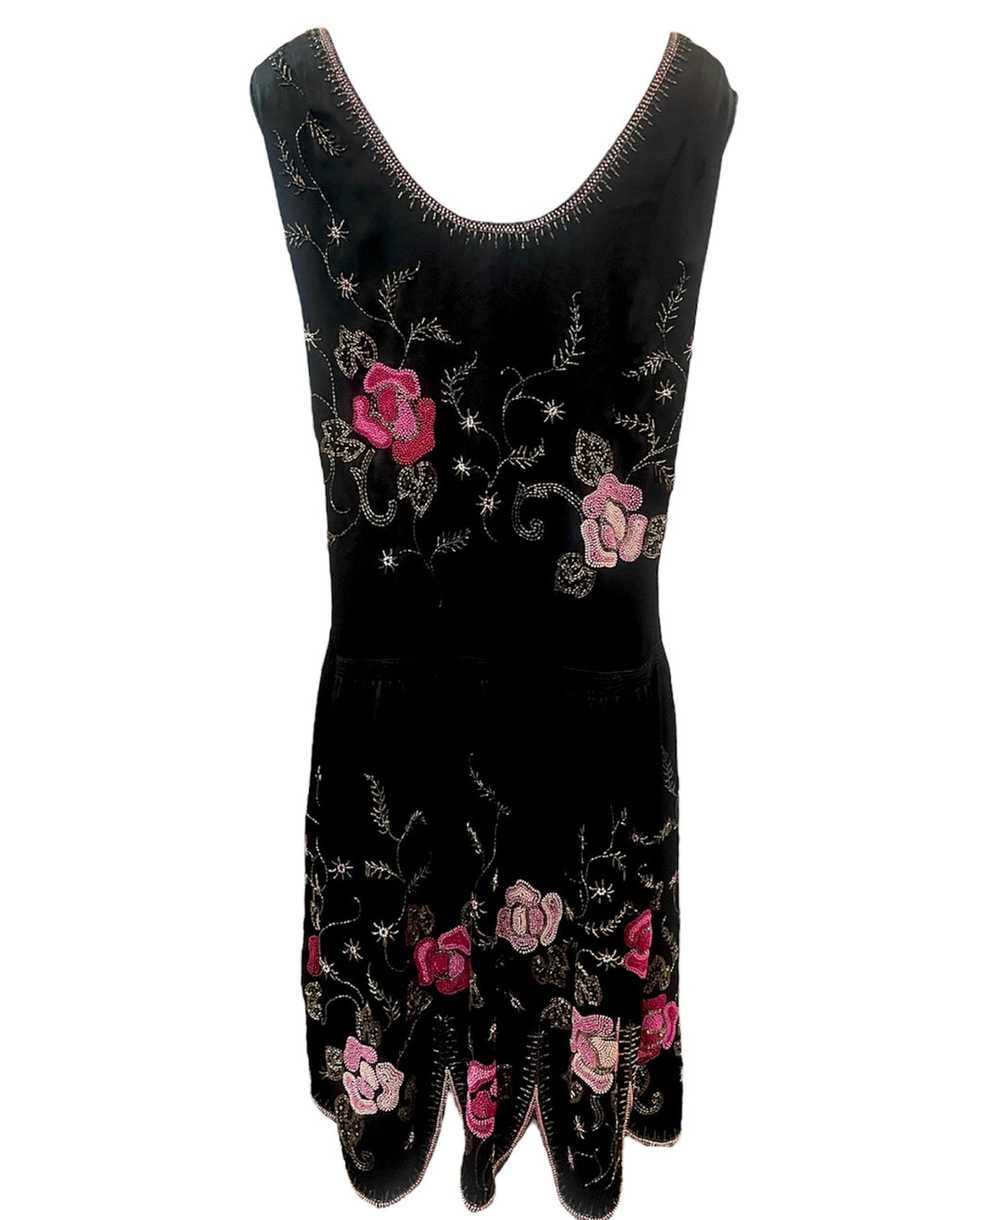 20s Satin Floral Beaded Dress with Scallop Hem - image 3